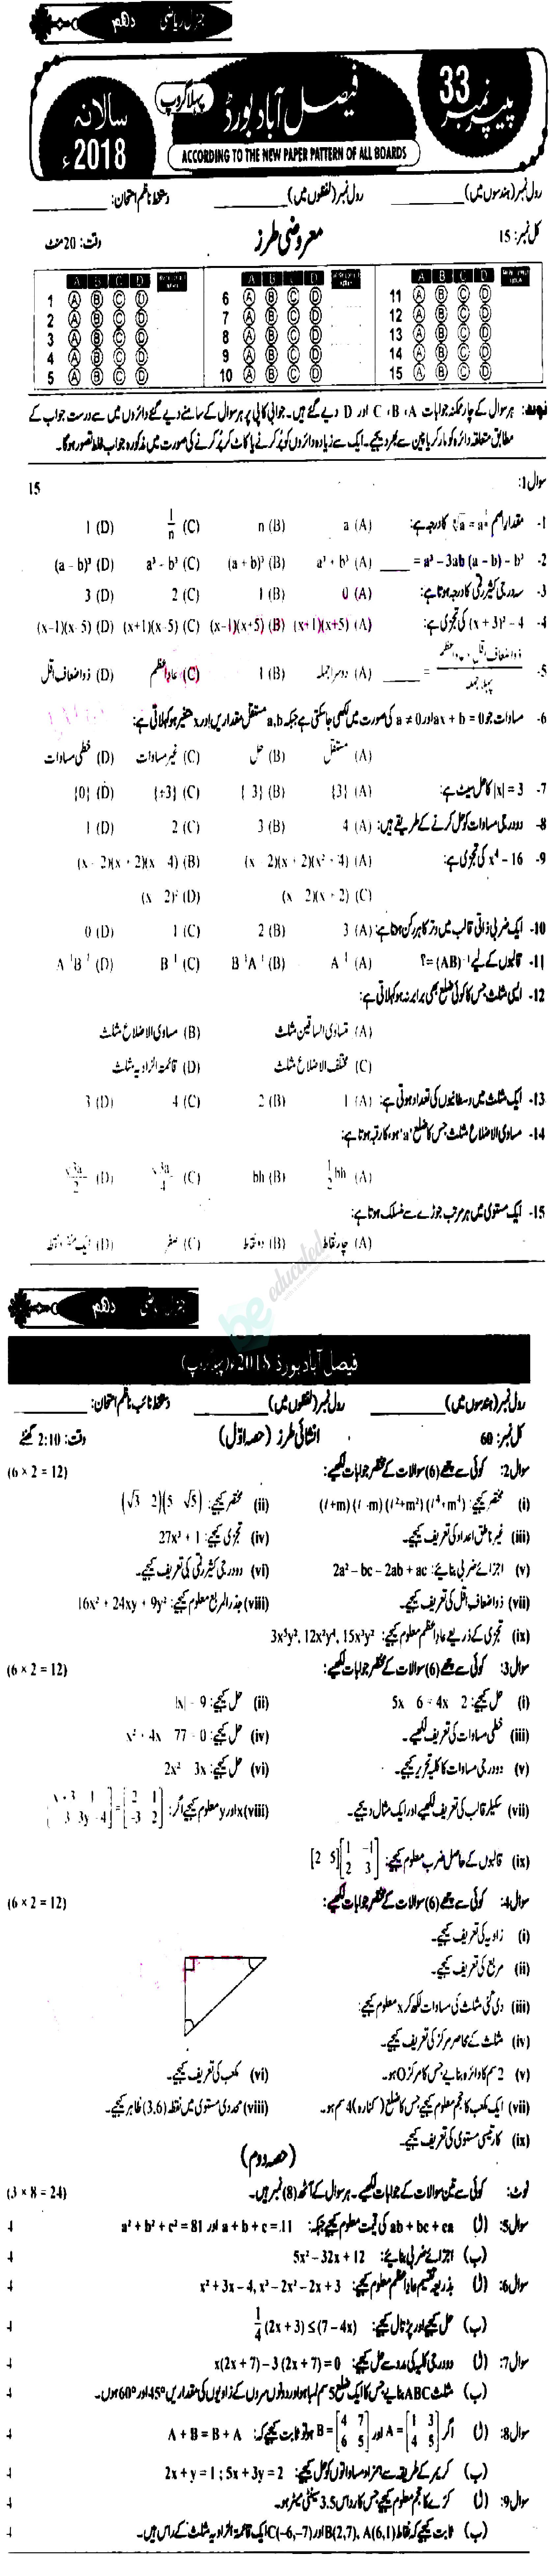 General Math 10th class Past Paper Group 1 BISE Faisalabad 2018